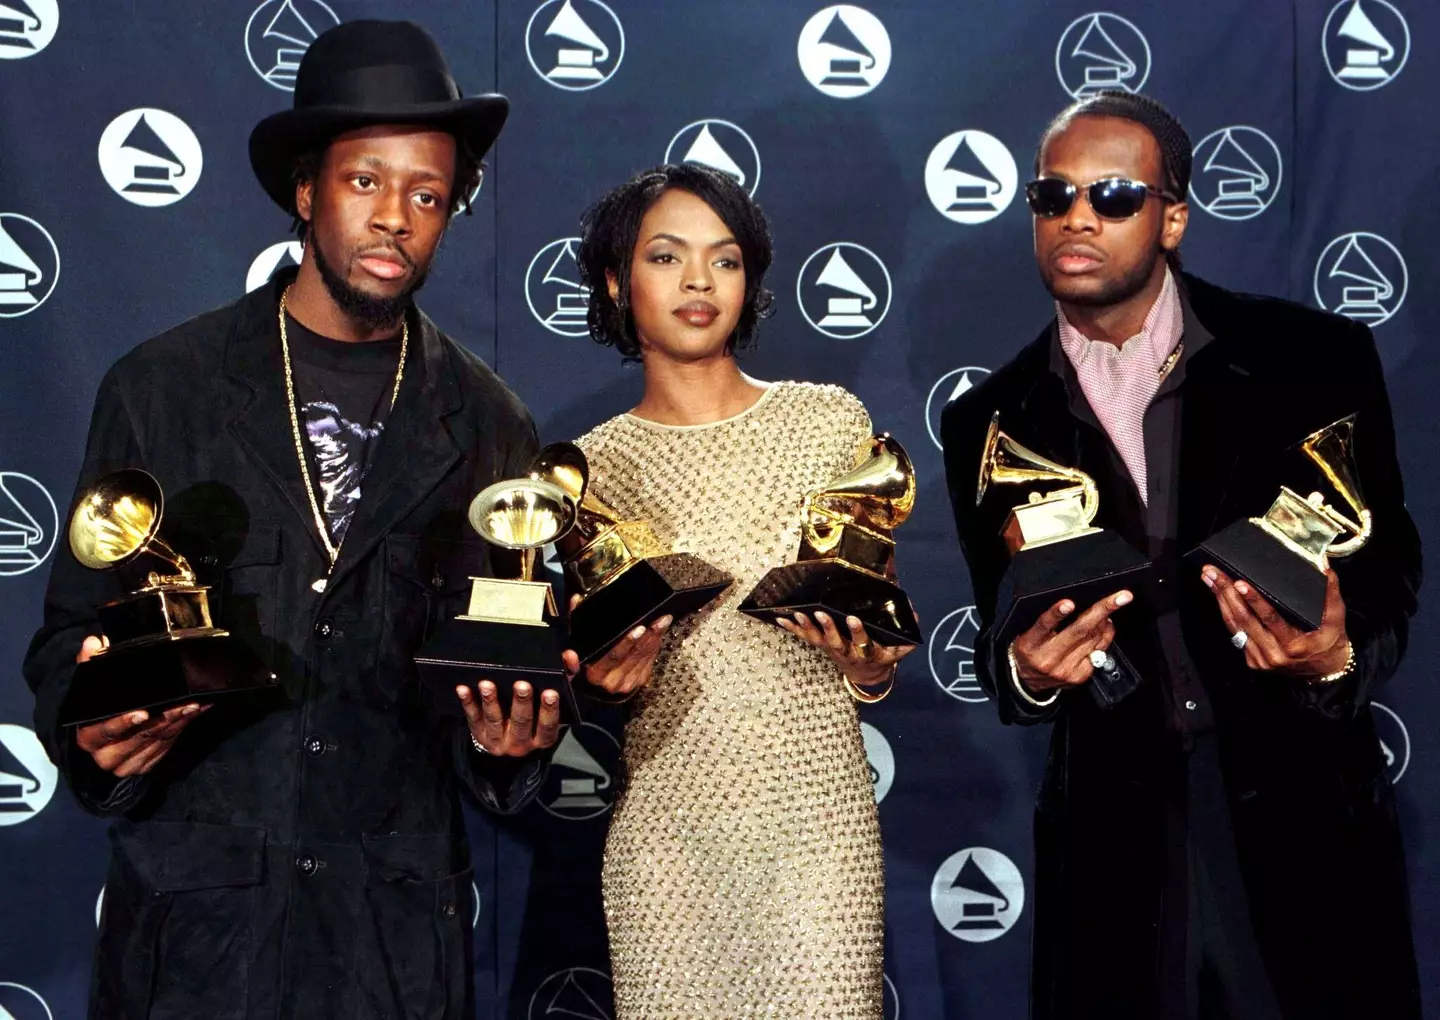 The Fugees star Prakazrel Michel (right) alongside Wyclef Jean and Lauryn Hill.